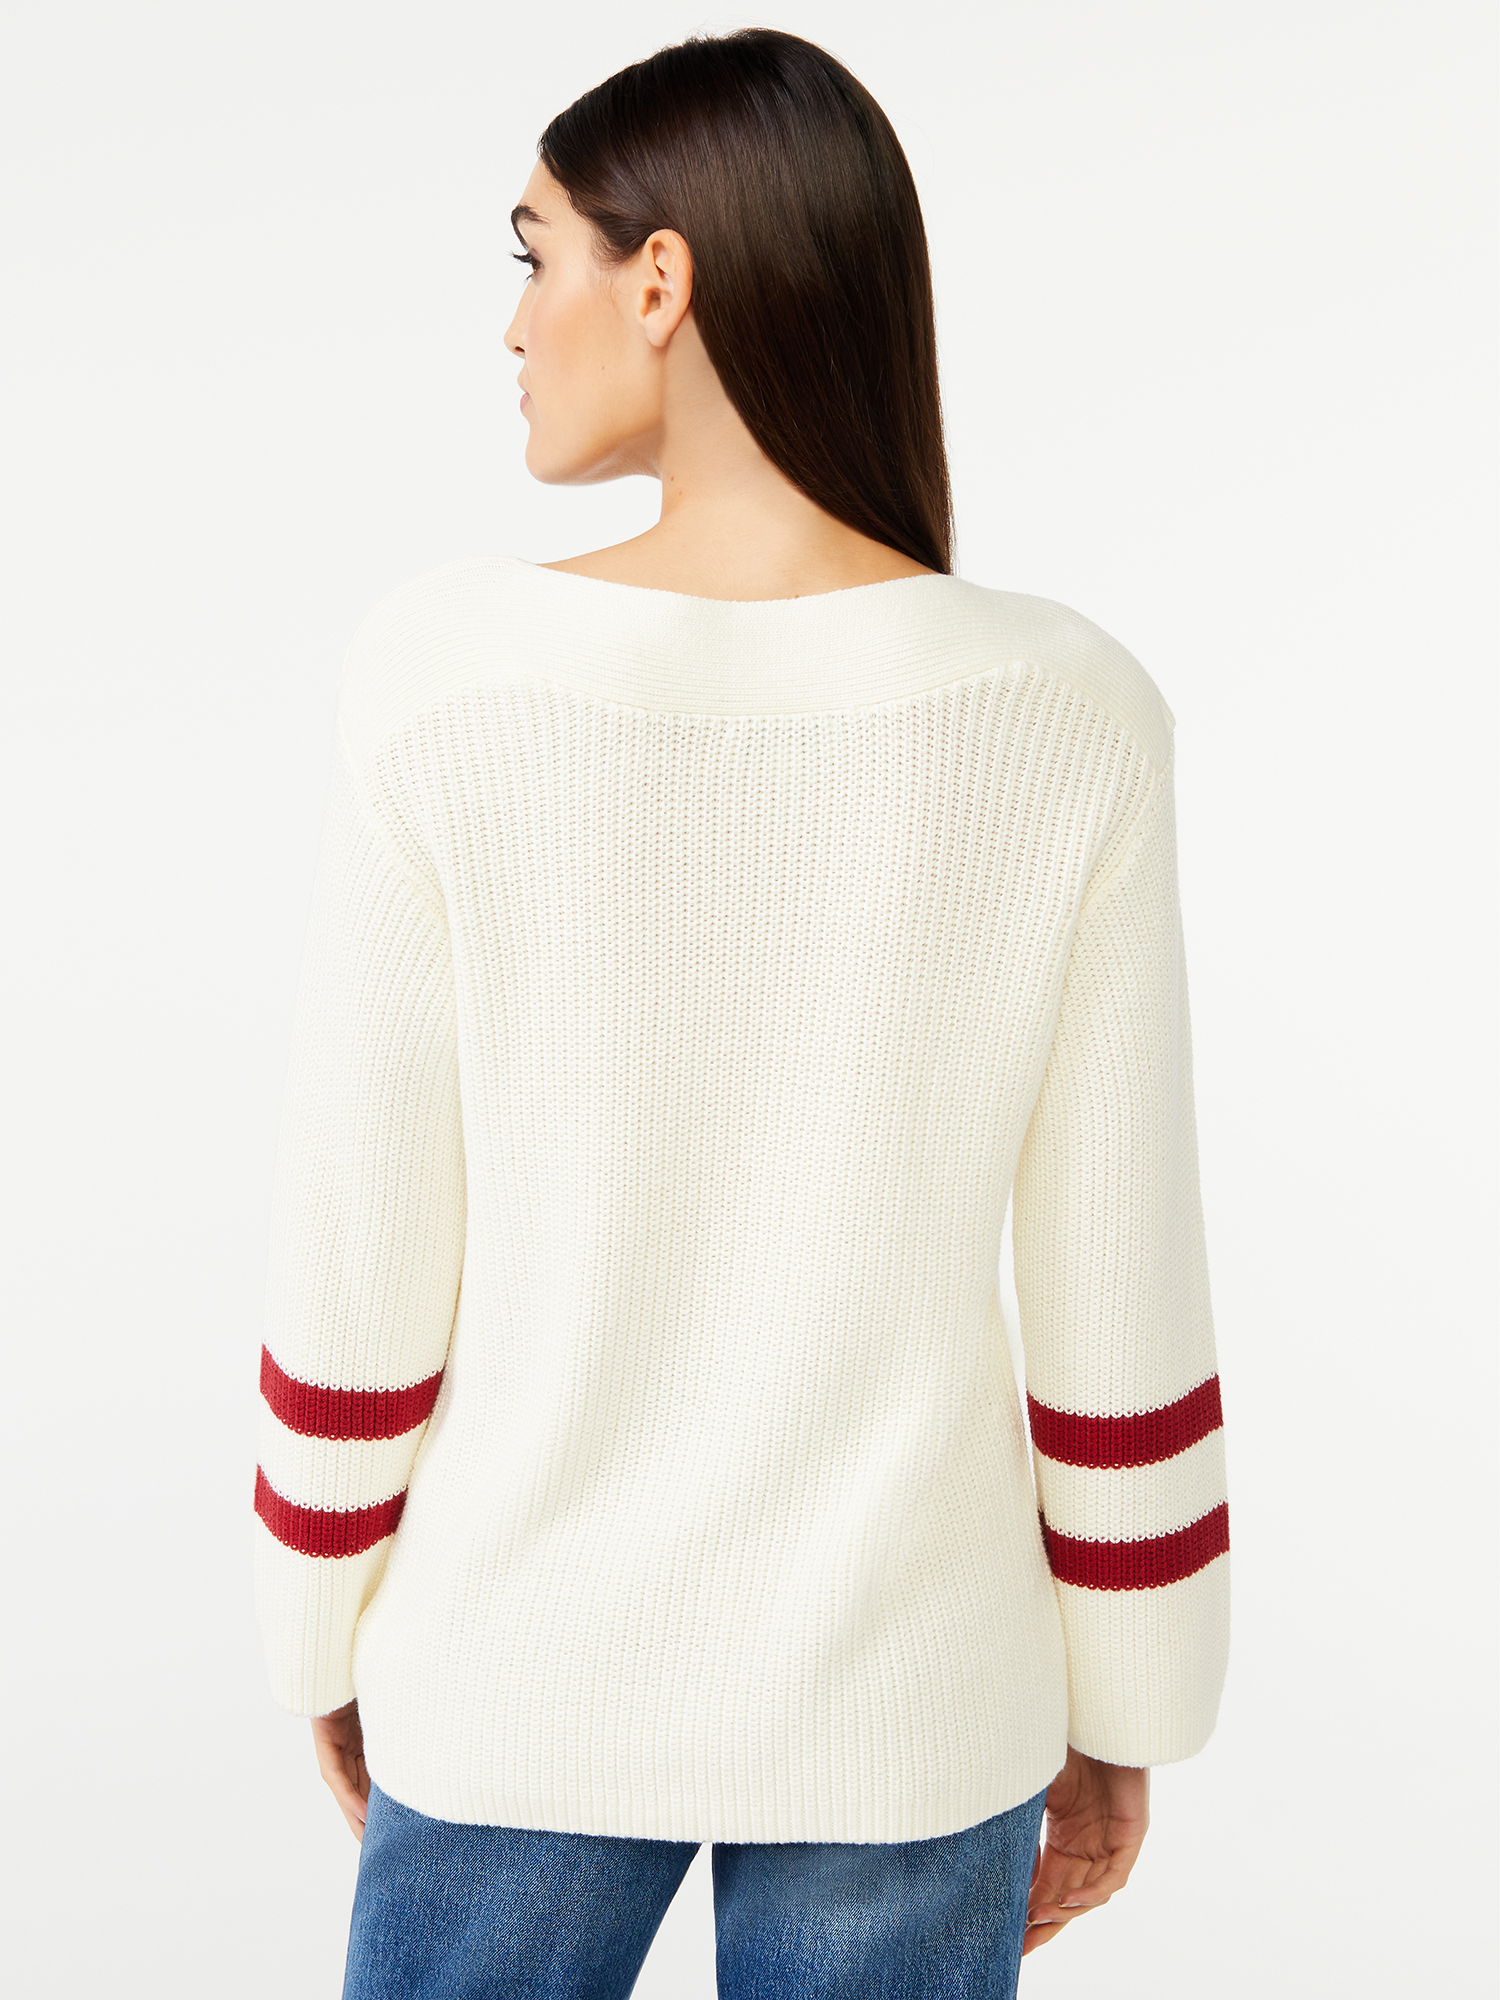 Free Assembly Women’s Button Shoulder Sweater - image 3 of 6